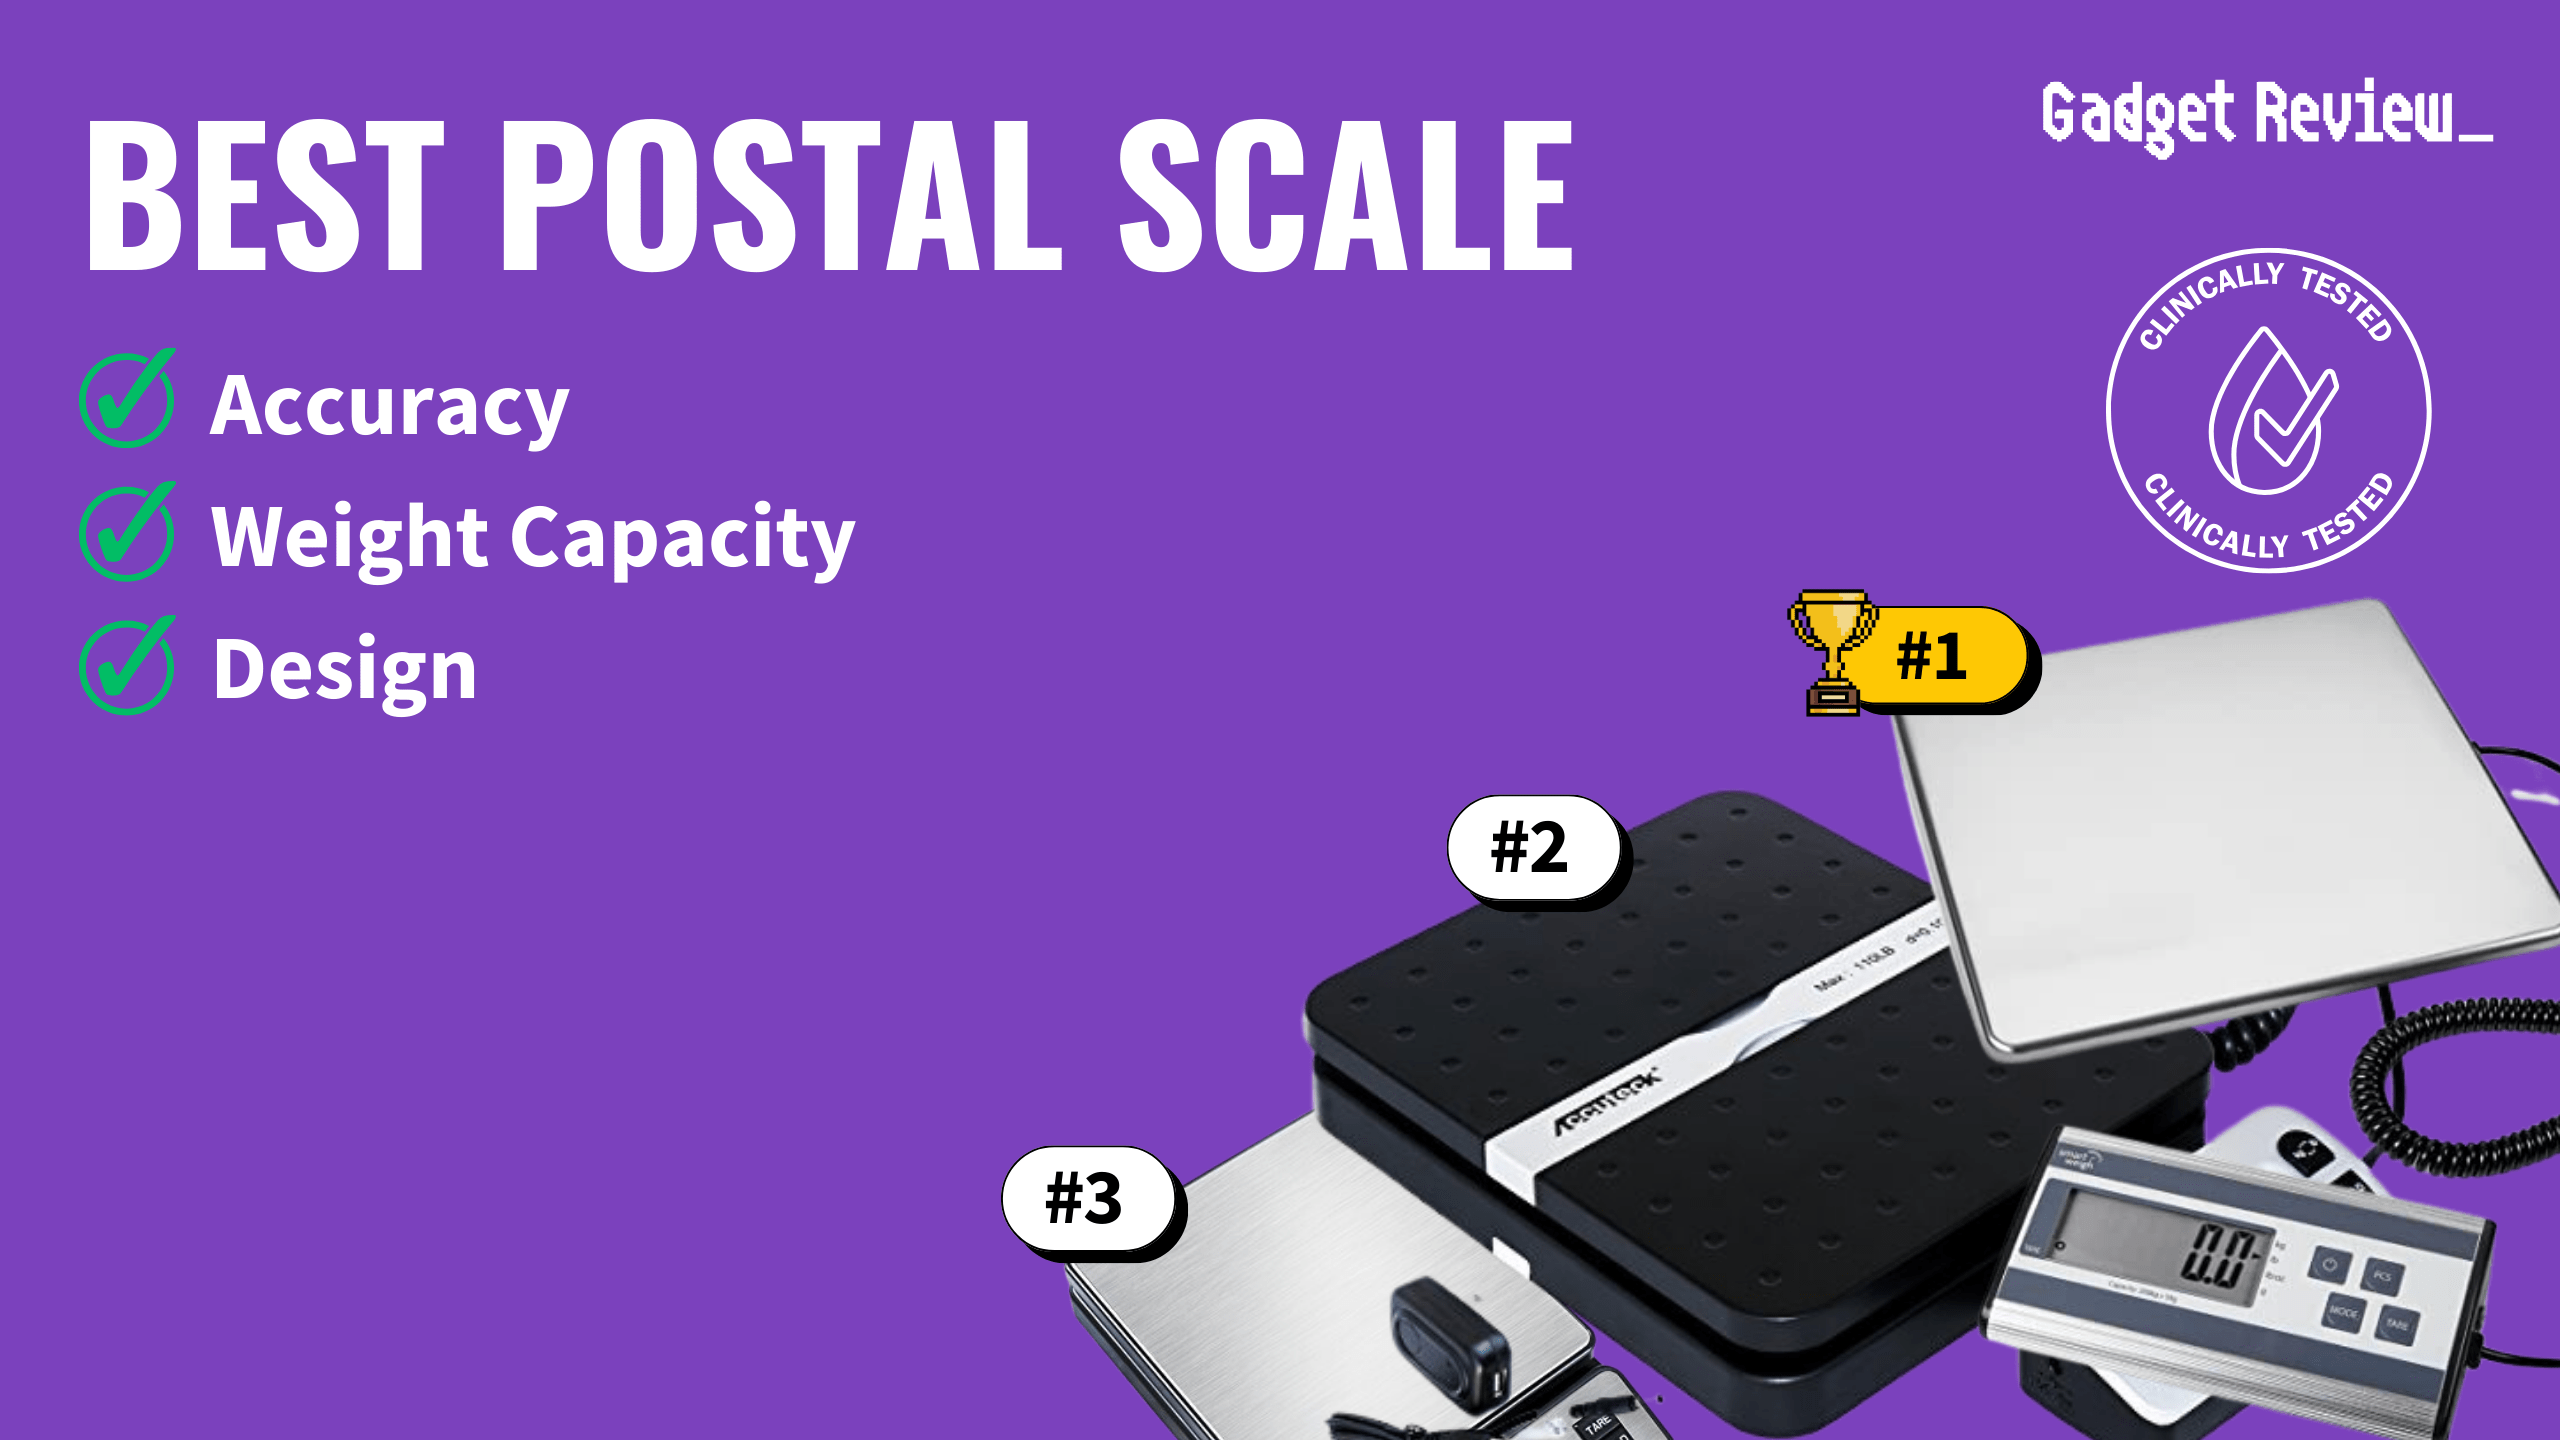 Buy Top Selling Shipping and Mail Scale Online - The UltraShip 35